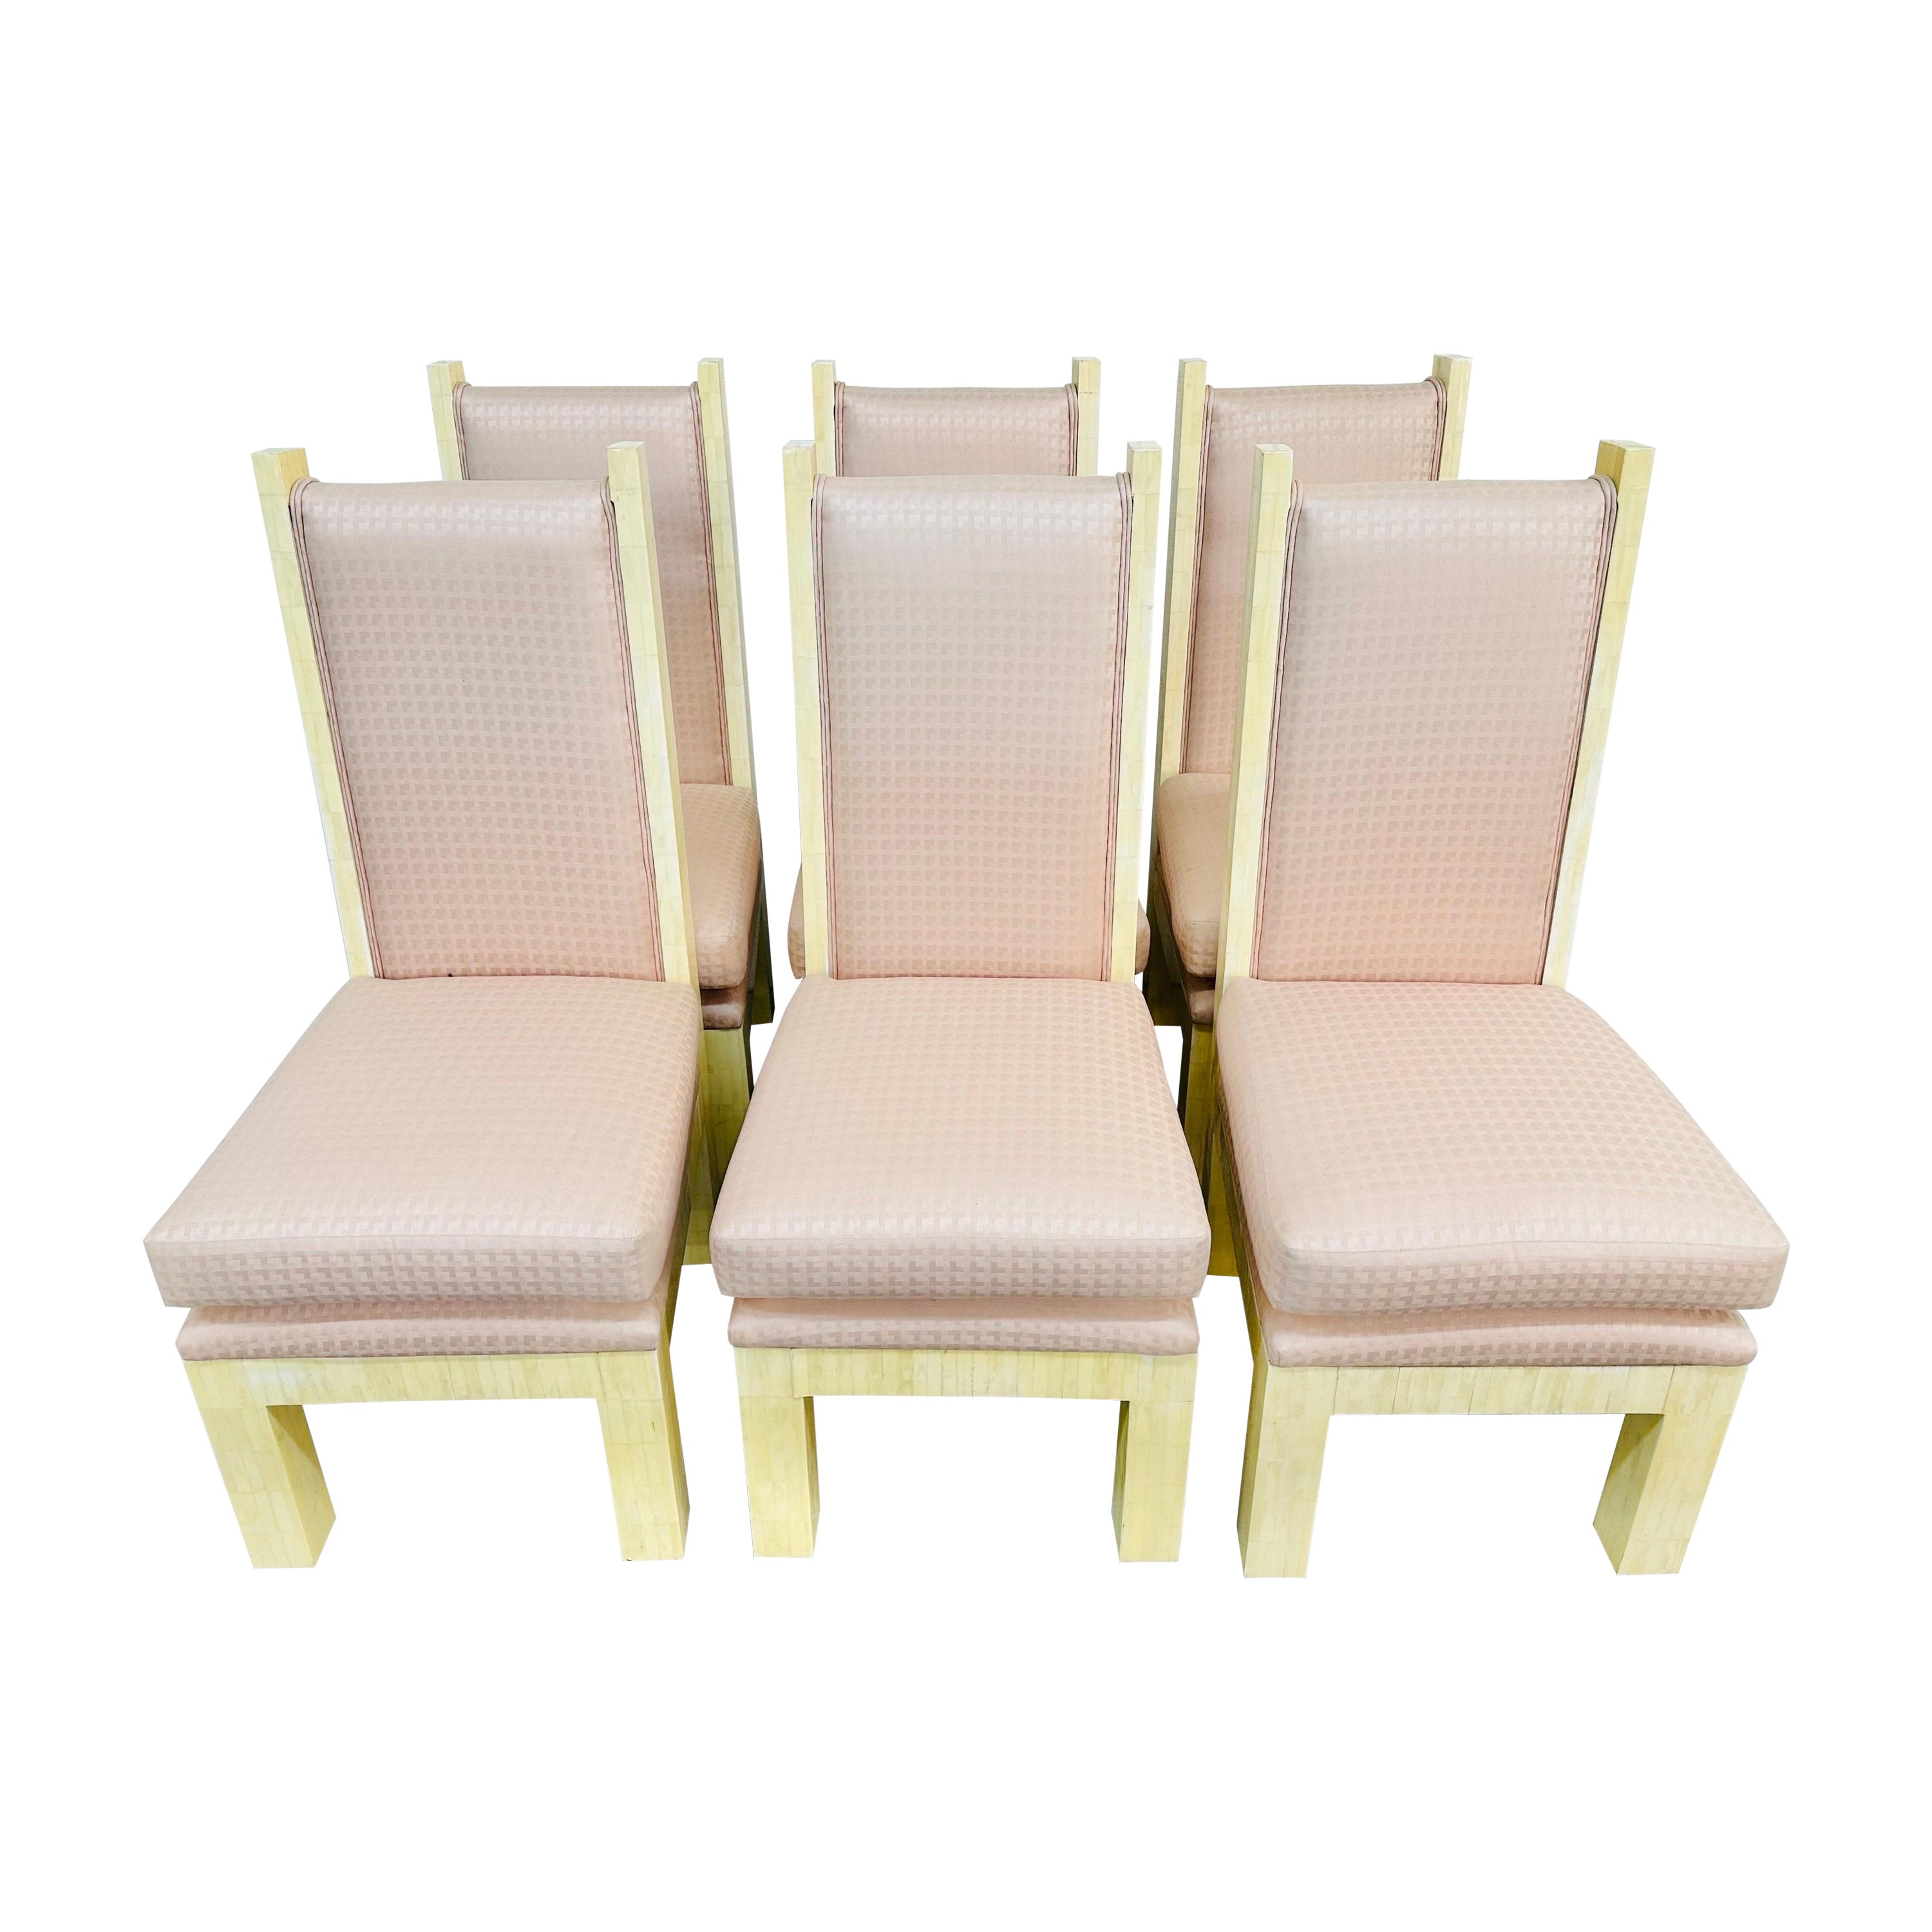 Vintage Modern Enrique Garcel Tessellated Dining Chairs - Set of 6 For Sale